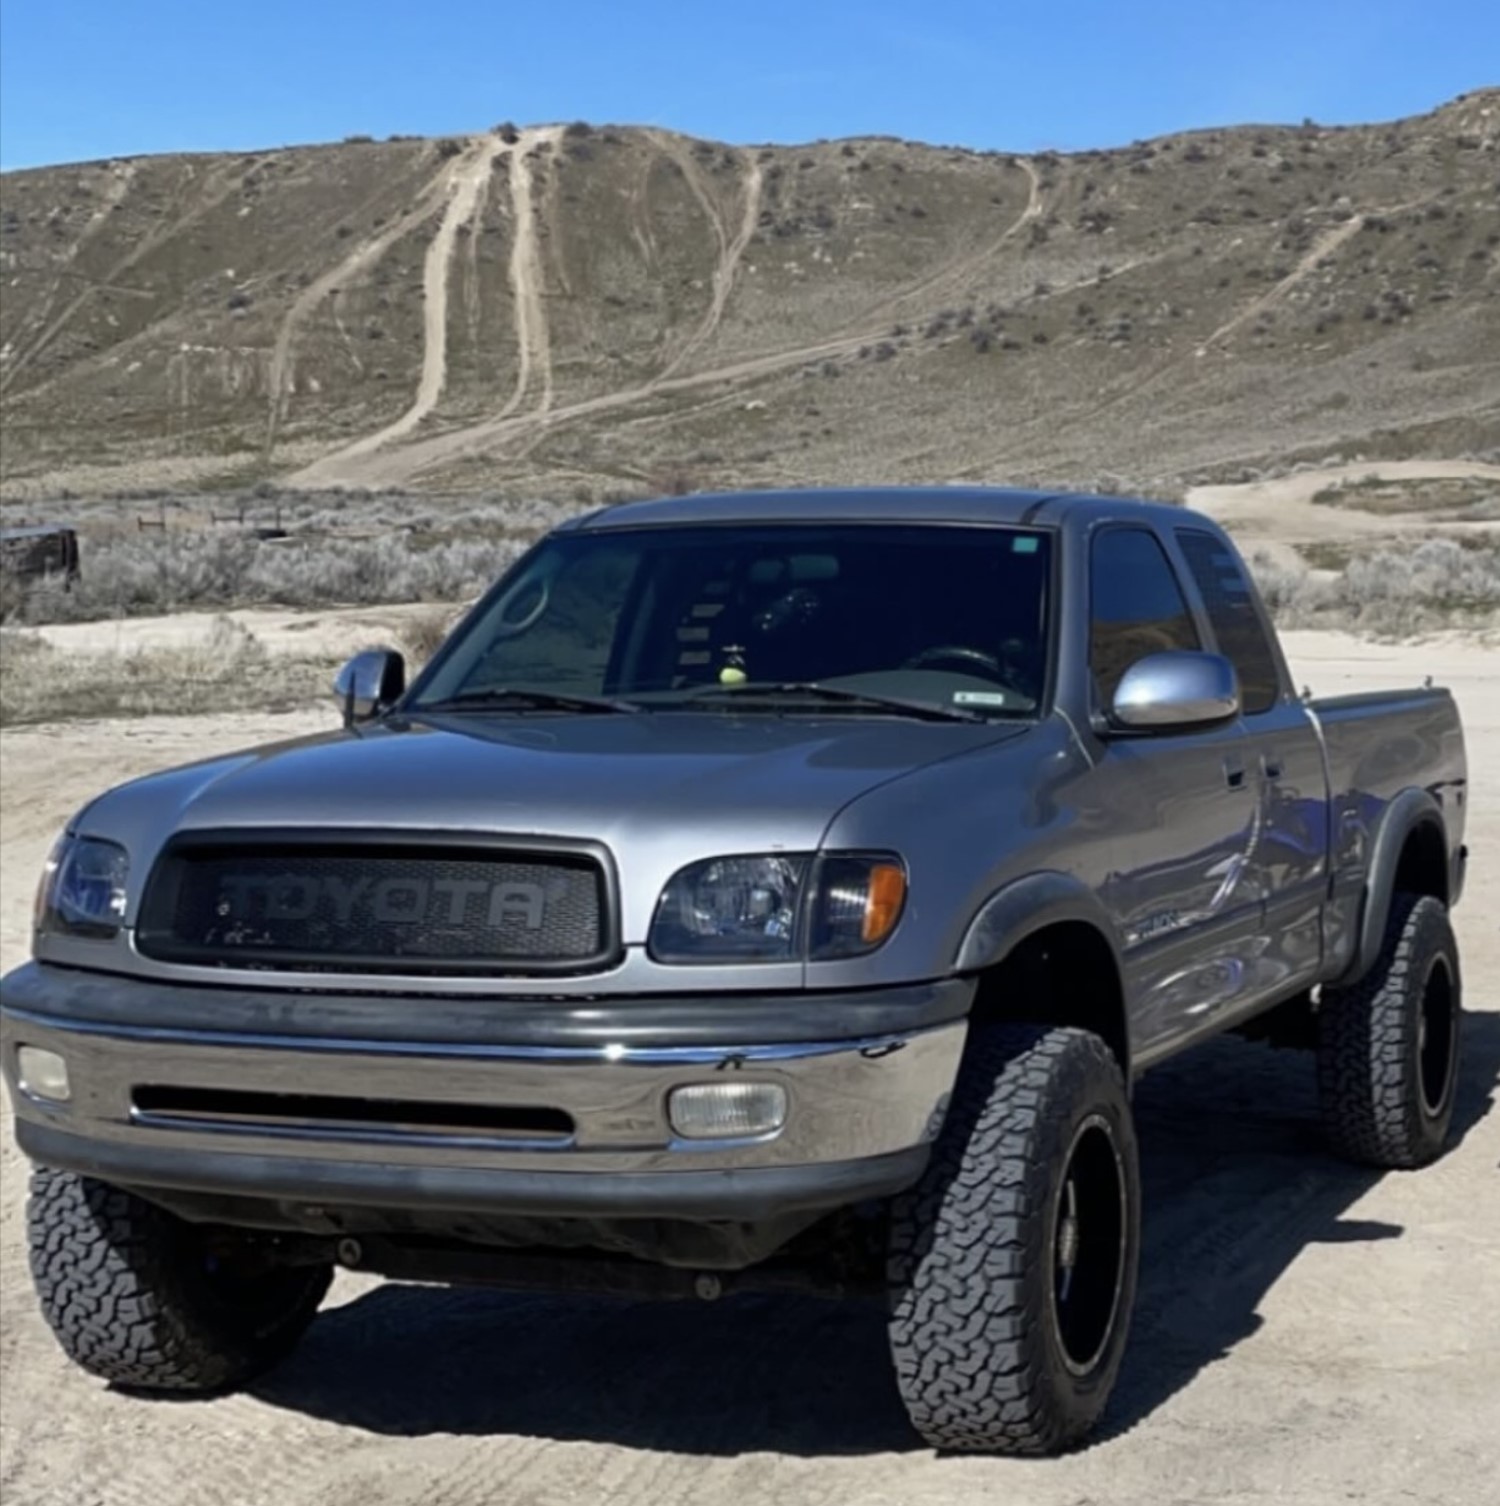 Rugged and Stealthy: First Gen Toyota Tundra in the Desert with Flat Black Grille